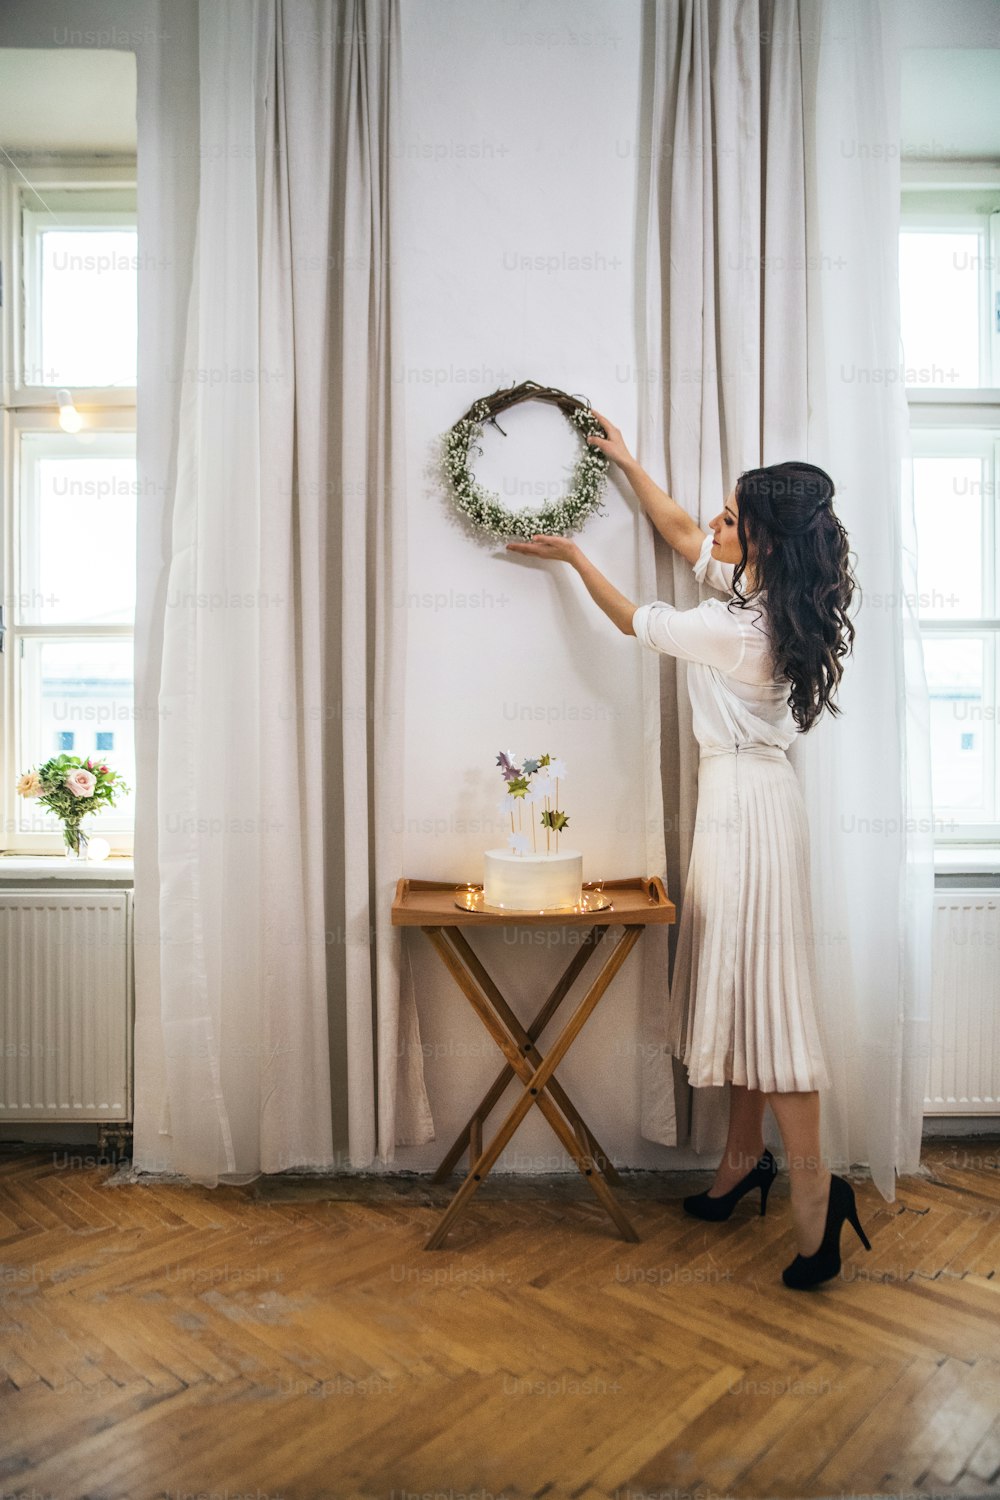 A woman hanging up a wreath on wall on indoor party, a cake on stand. Copy space.